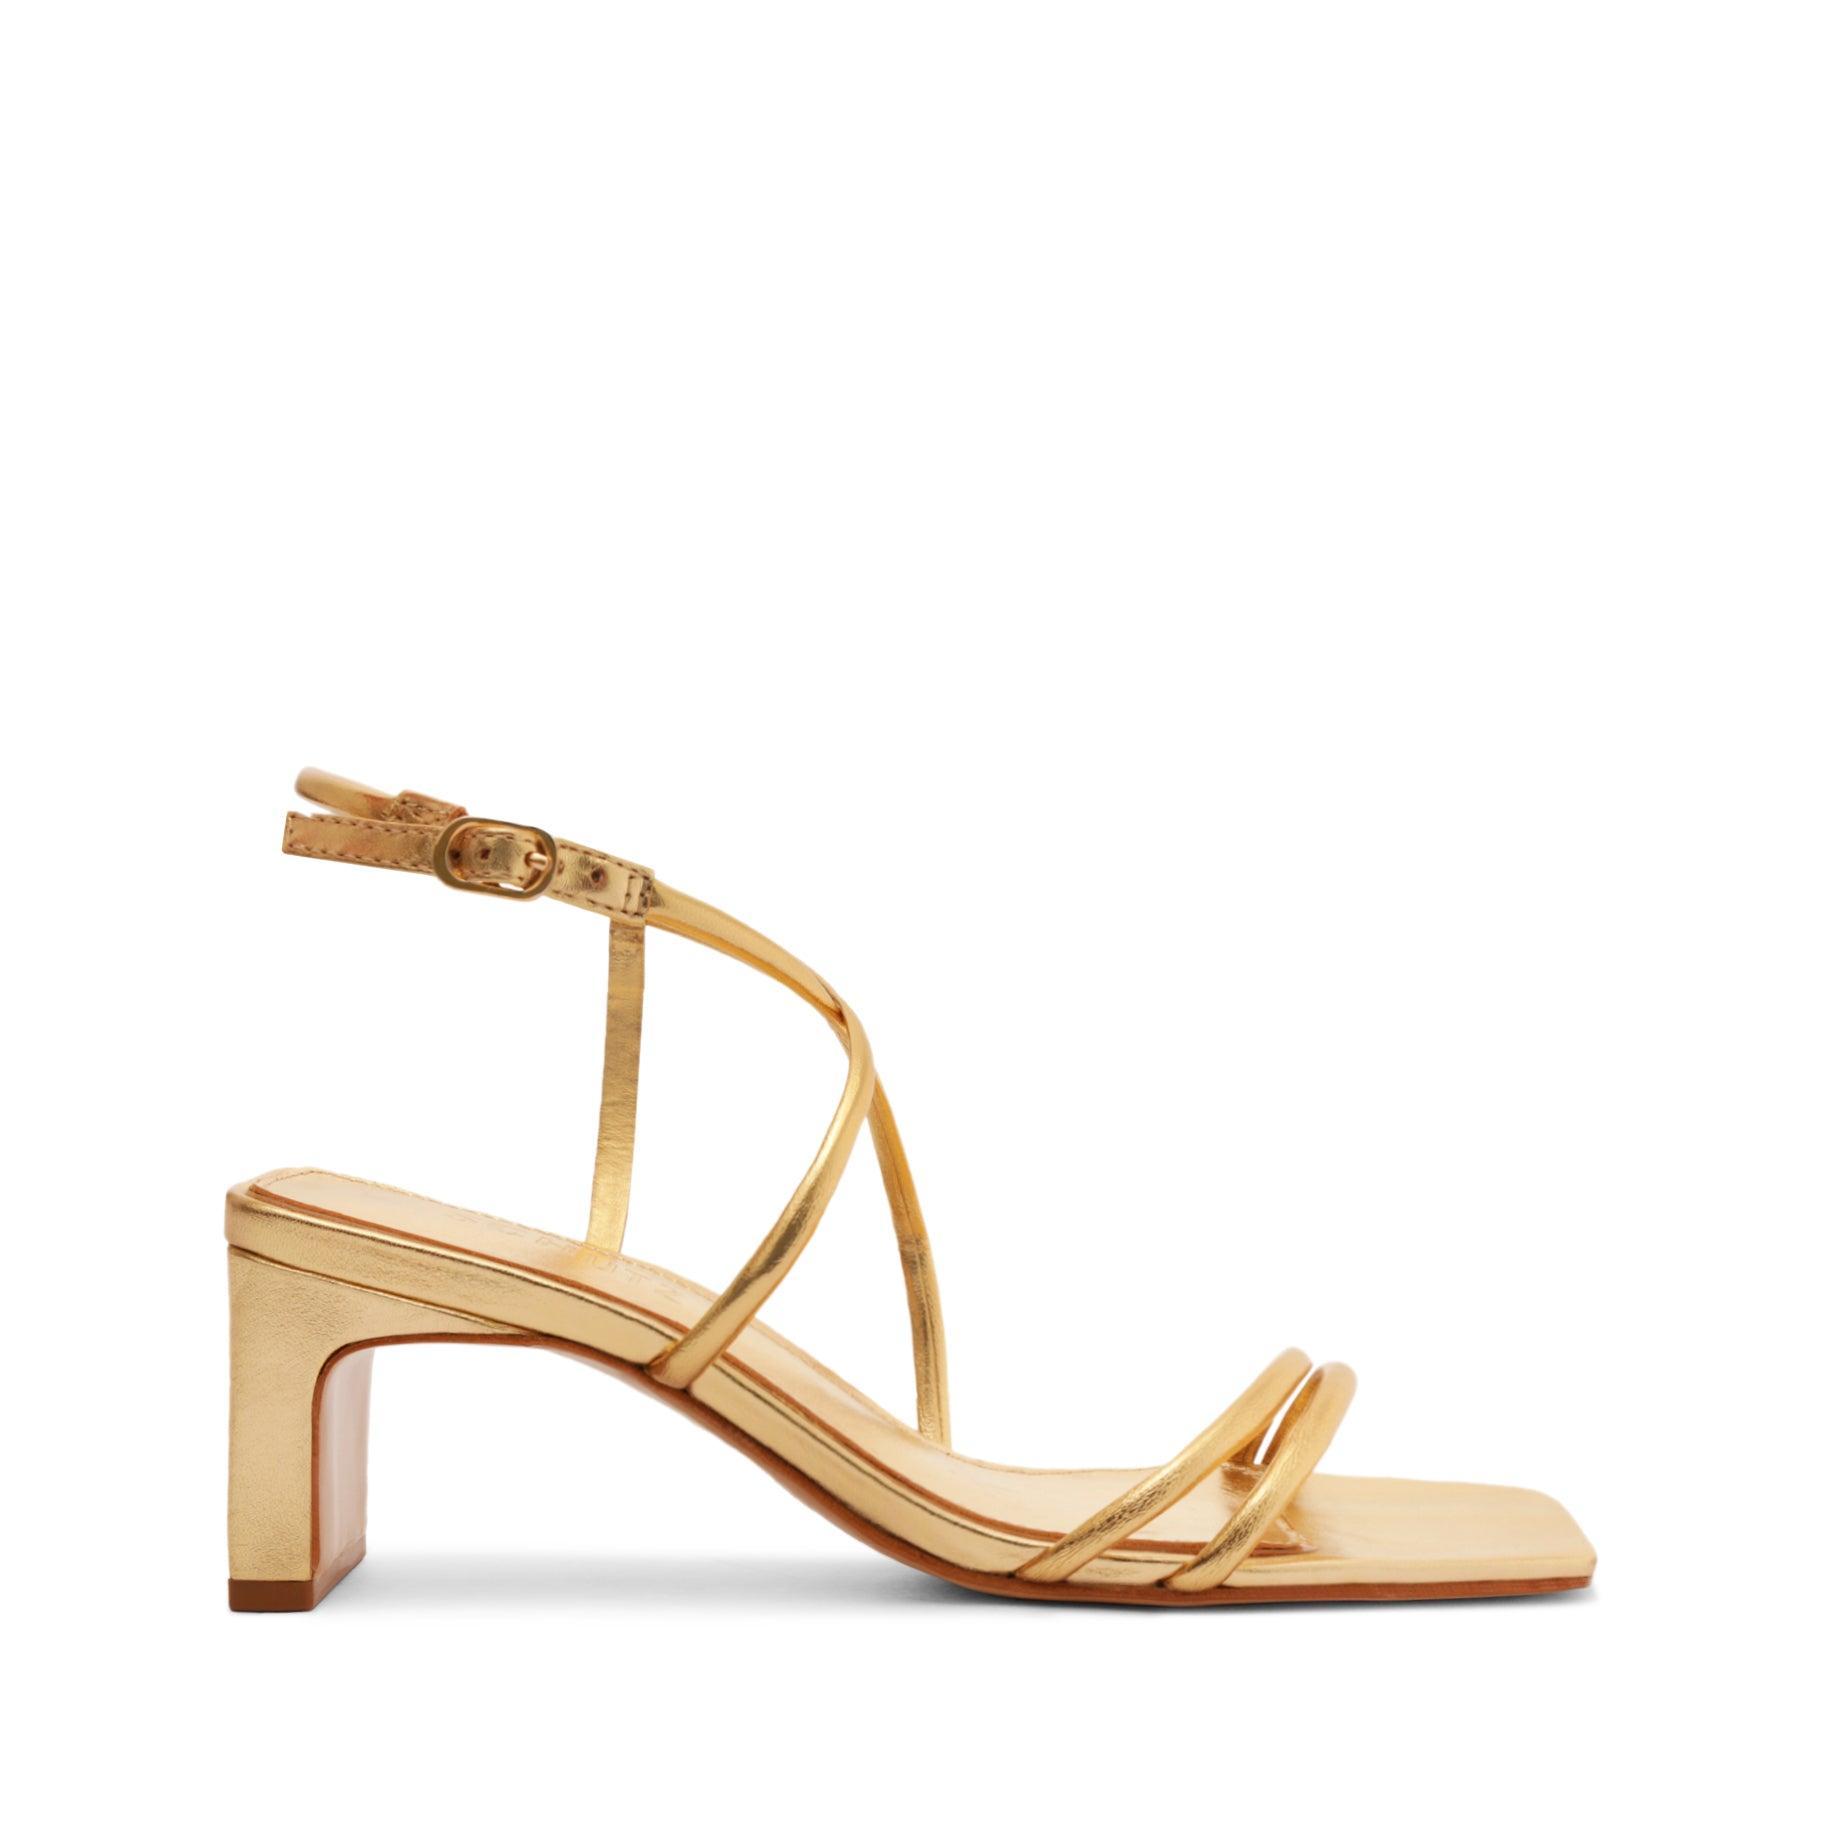 Schutz Aimee Block Sandal in Nude. - size 6.5 (also in 6, 7, 7.5, 8, 8.5, 9, 9.5, 10) Product Image